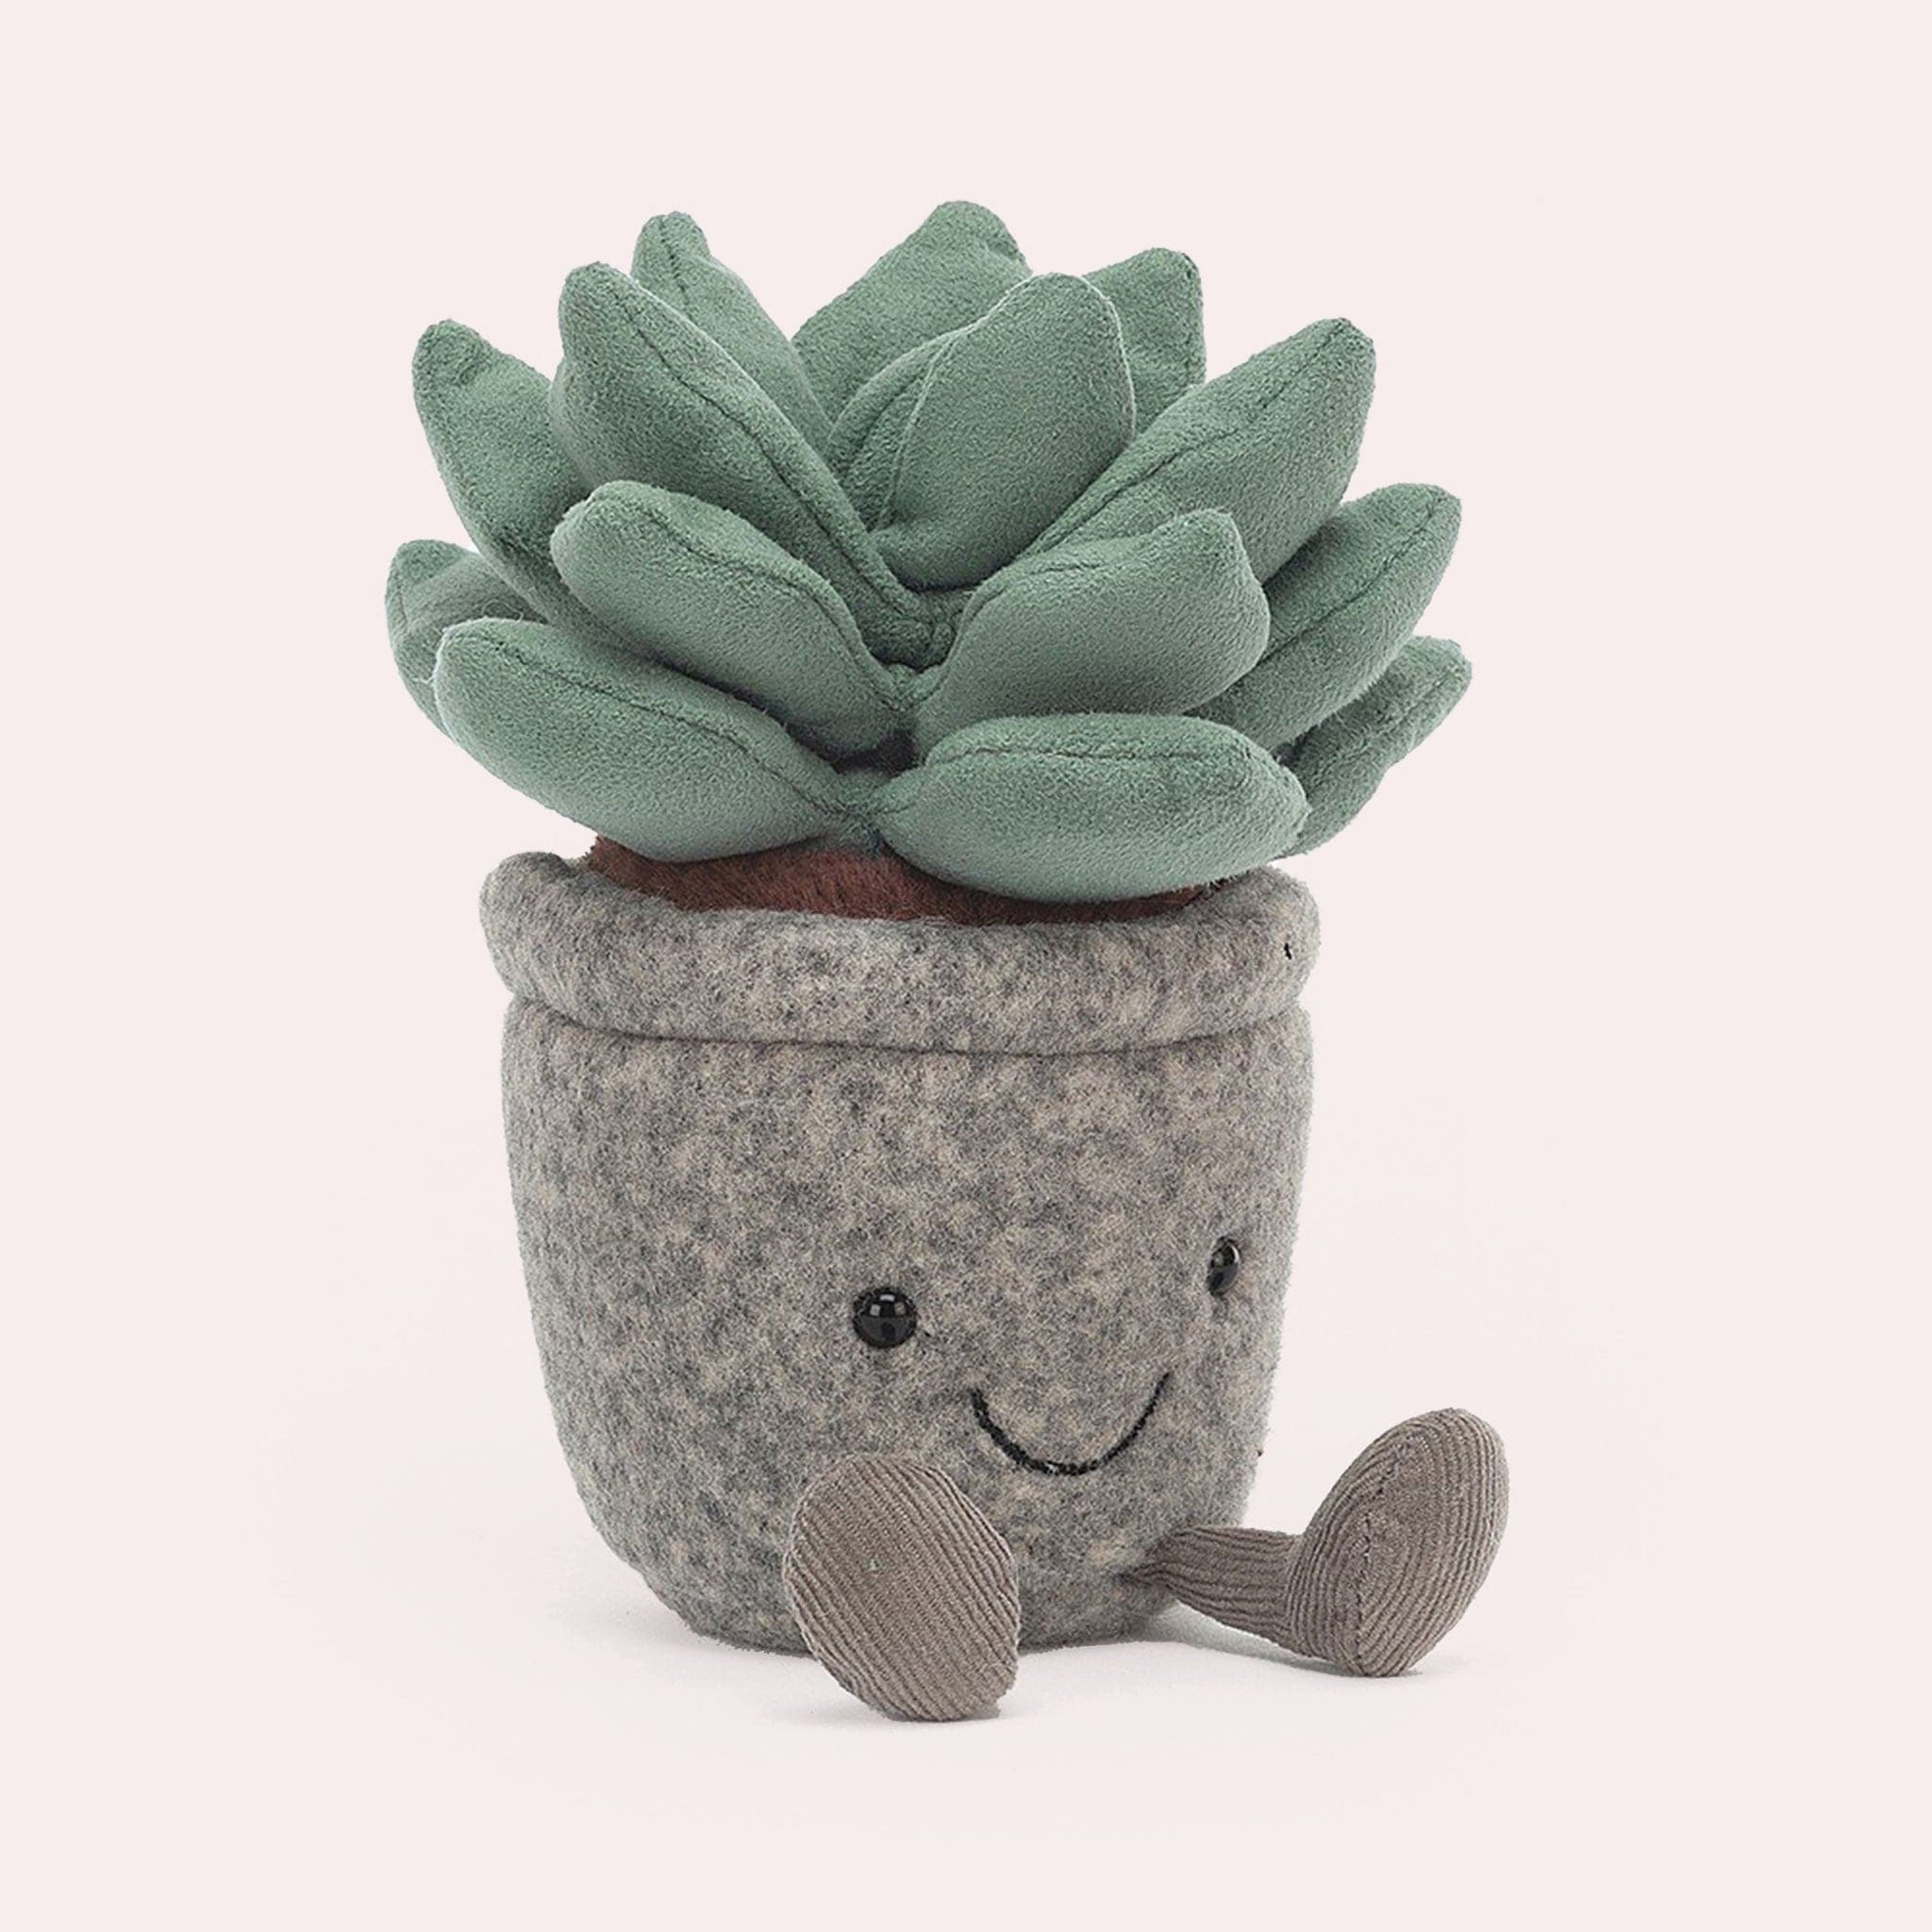 A stuffed toy succulent with little legs and a happy smiley face.